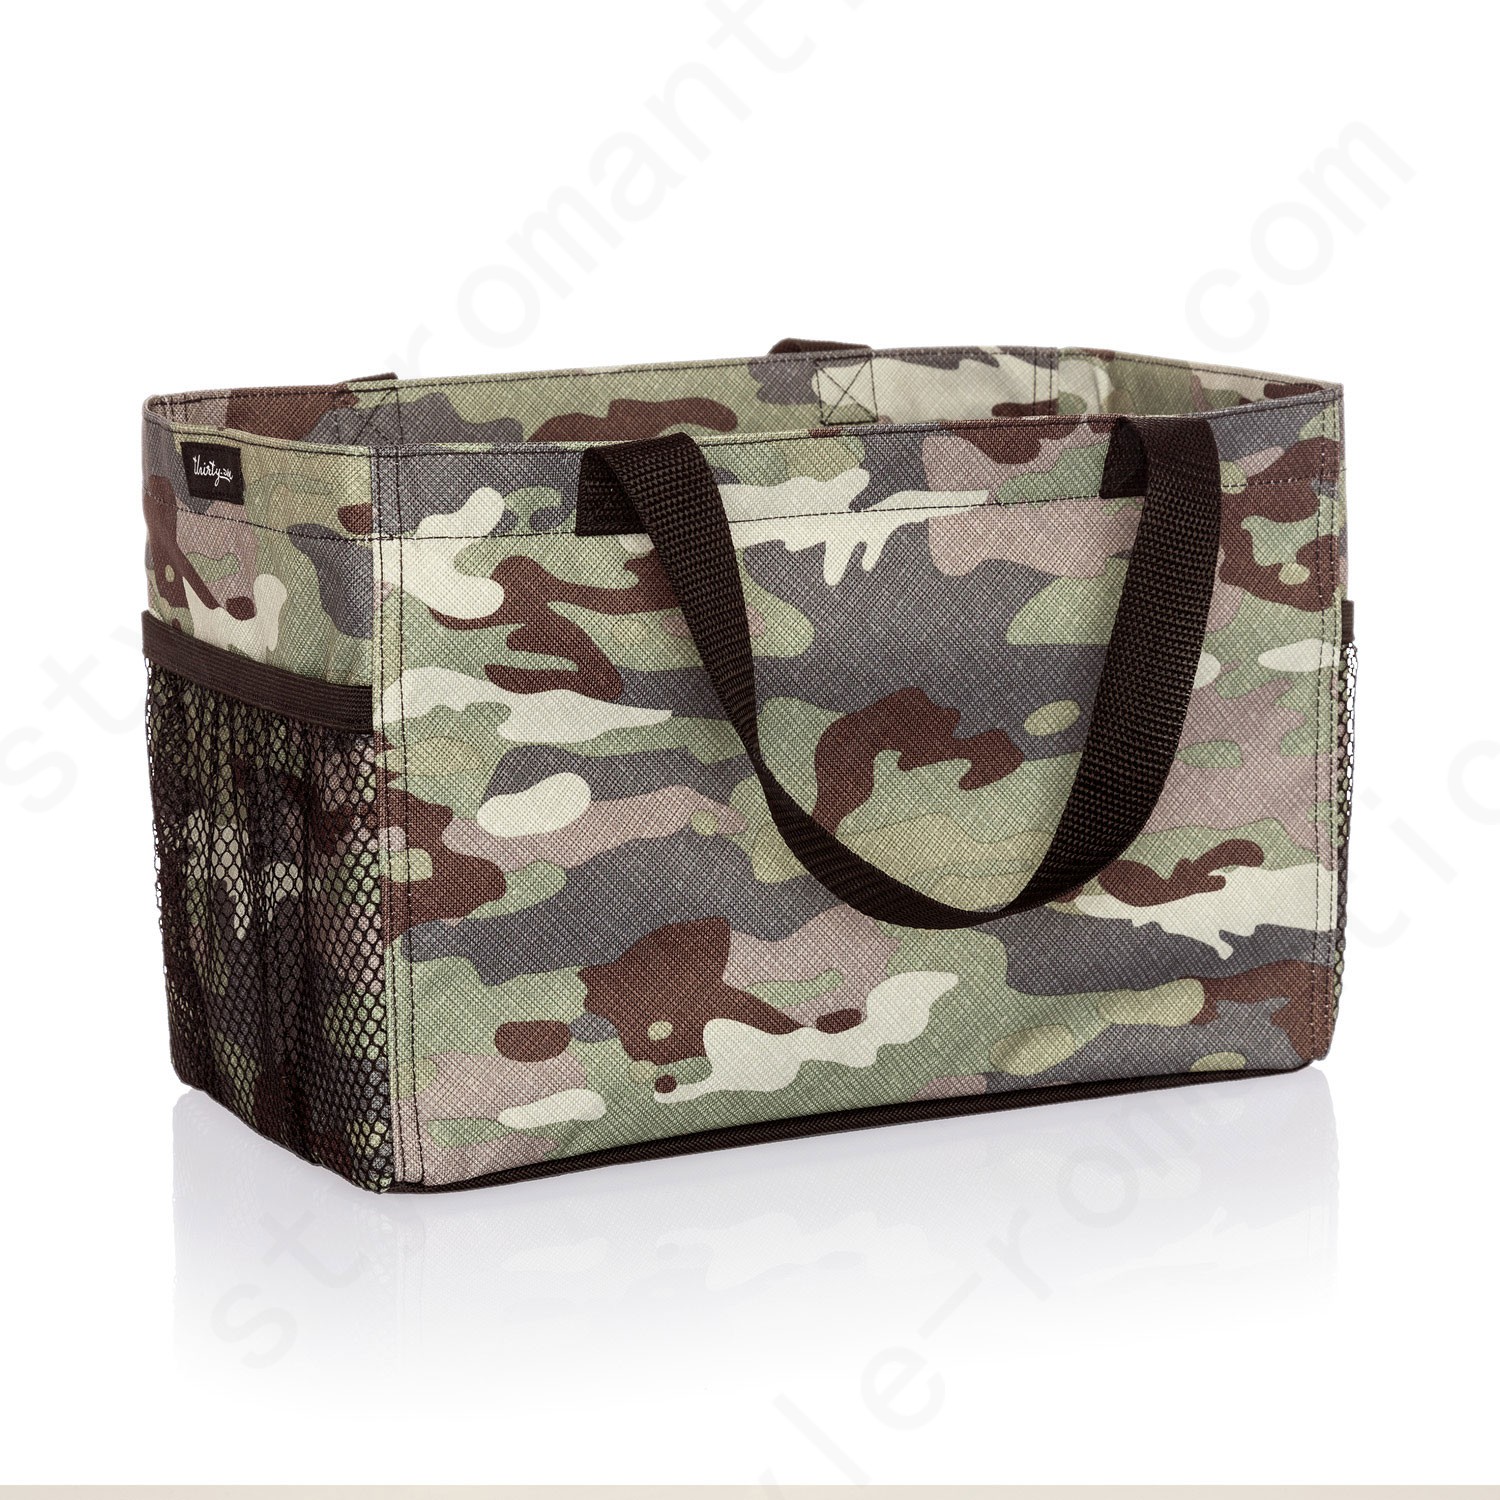 Thirty-One Gifts All-In Organizer - Camo Crosshatch - Thirty-One Gifts All-In Organizer - Camo Crosshatch